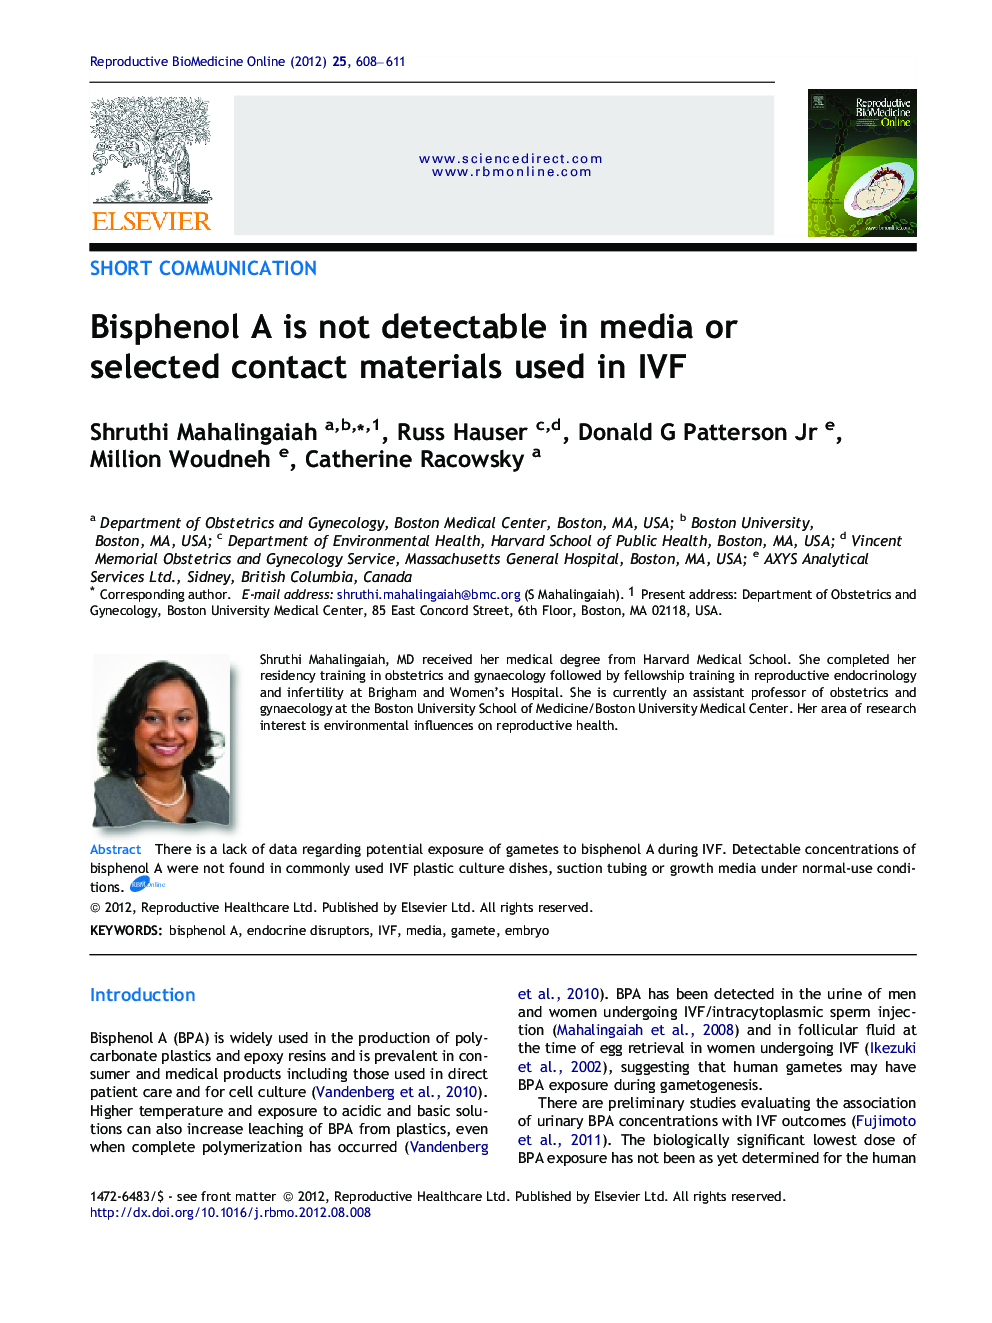 Bisphenol A is not detectable in media or selected contact materials used in IVF